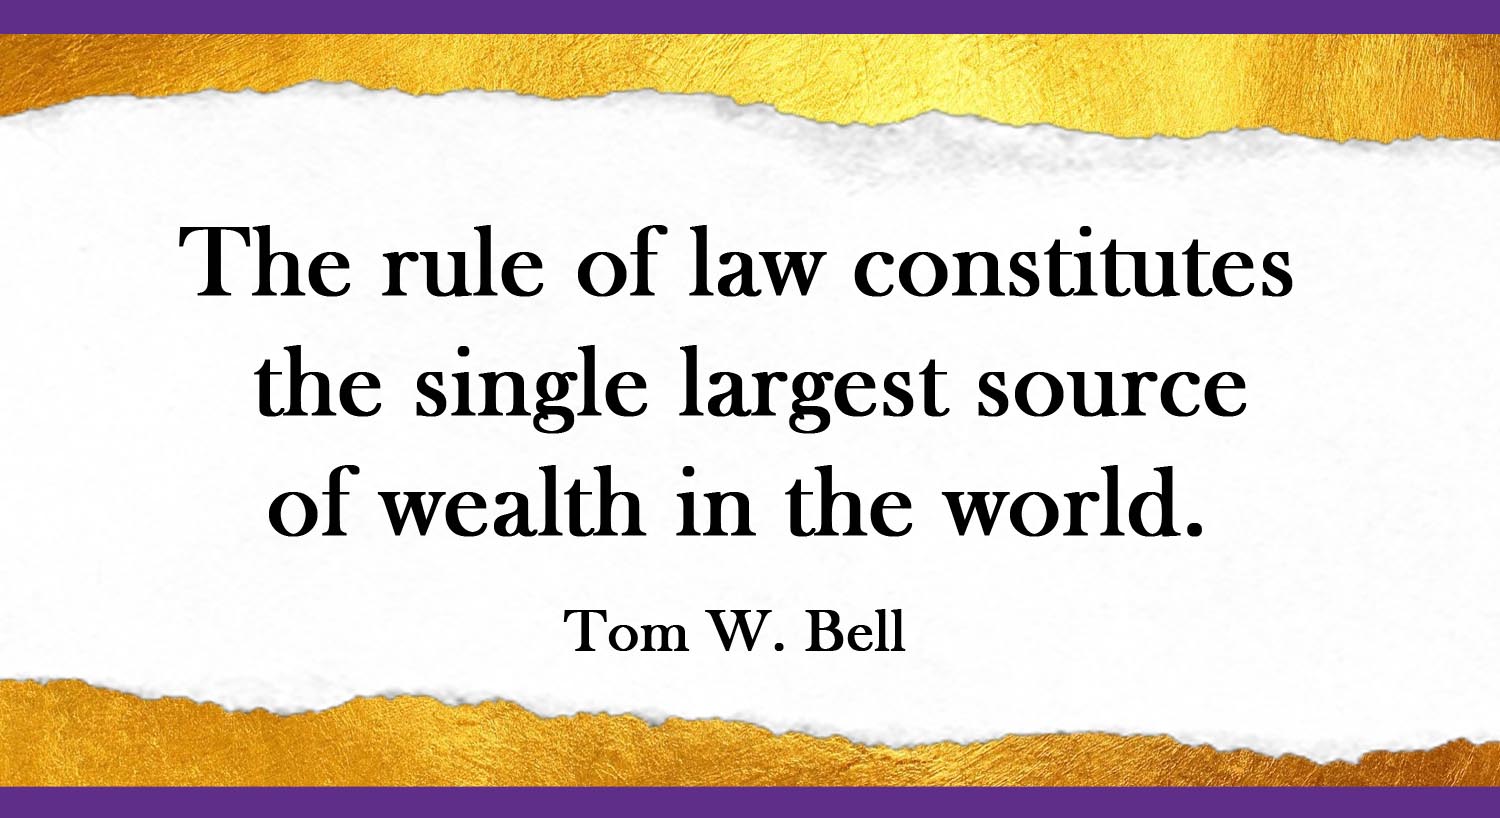 The rule of law constitutes the single larges source of wealth in the world.